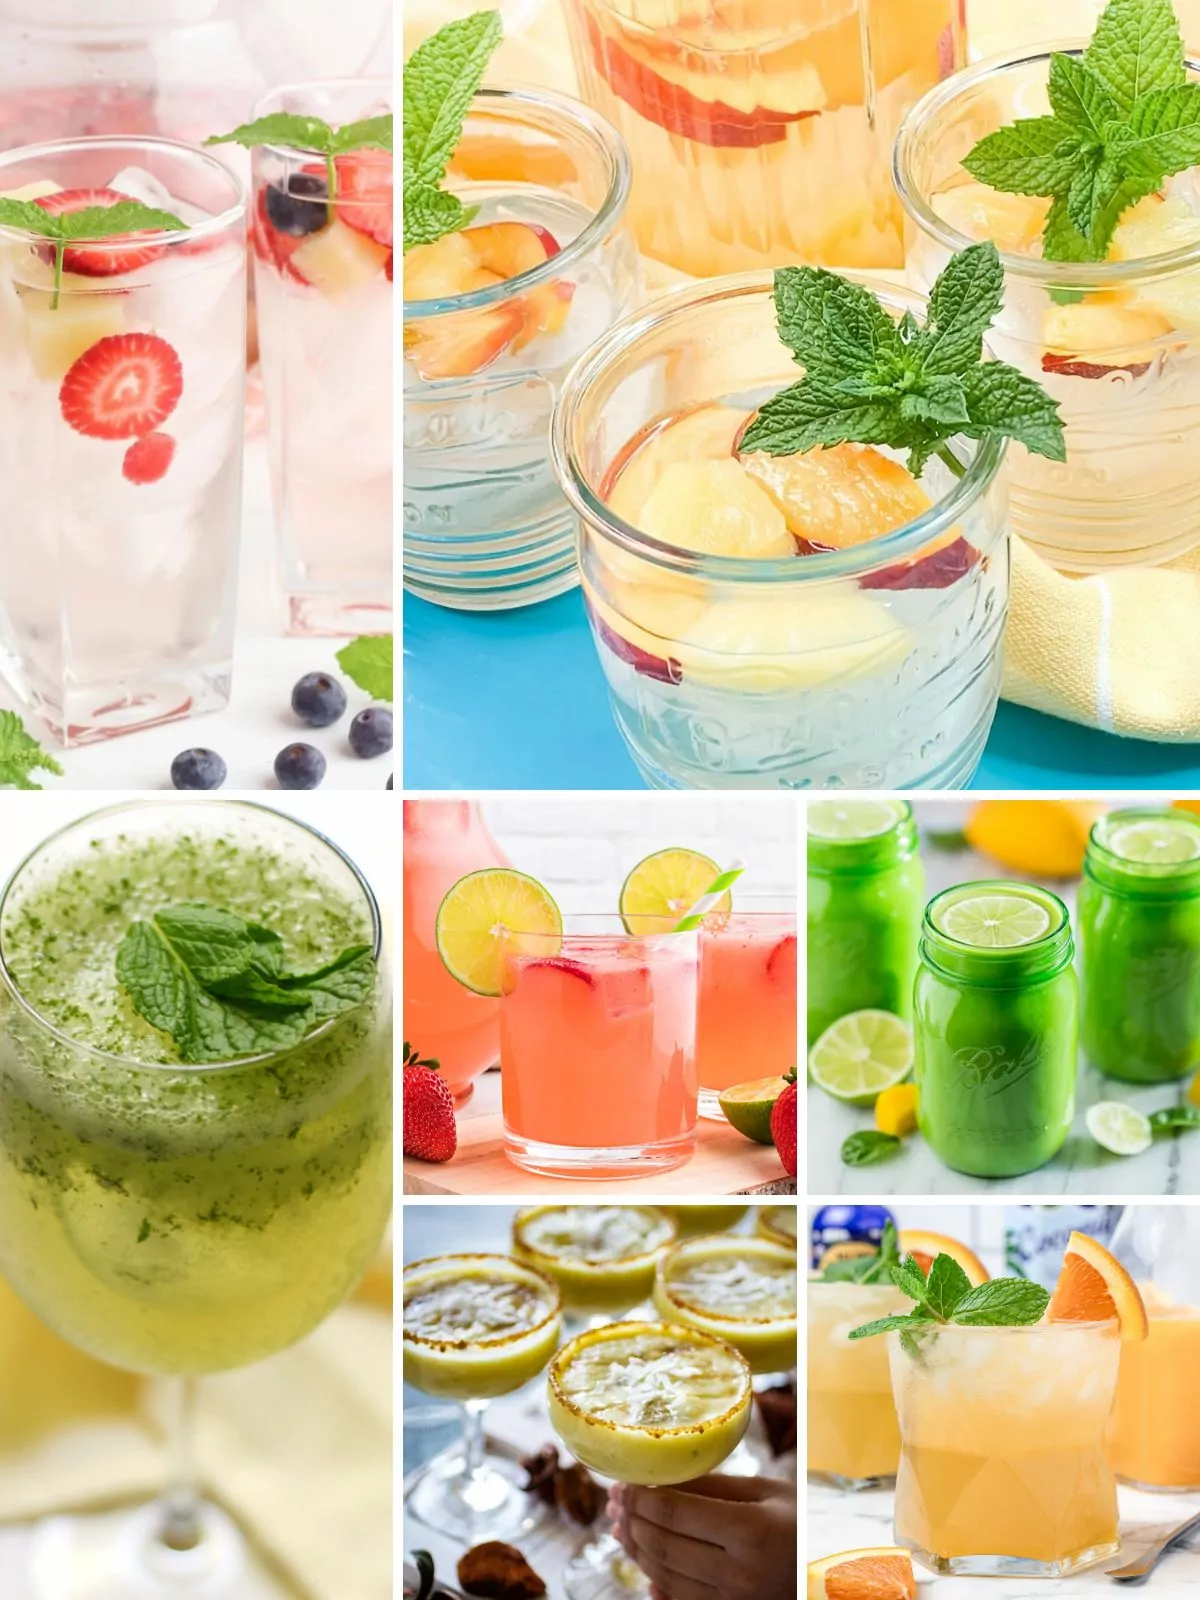 A colorful assortment of non-alcoholic beverages in various glasses, showcasing vibrant hues from fresh fruits, herbs, and garnishes like citrus slices and mint sprigs.